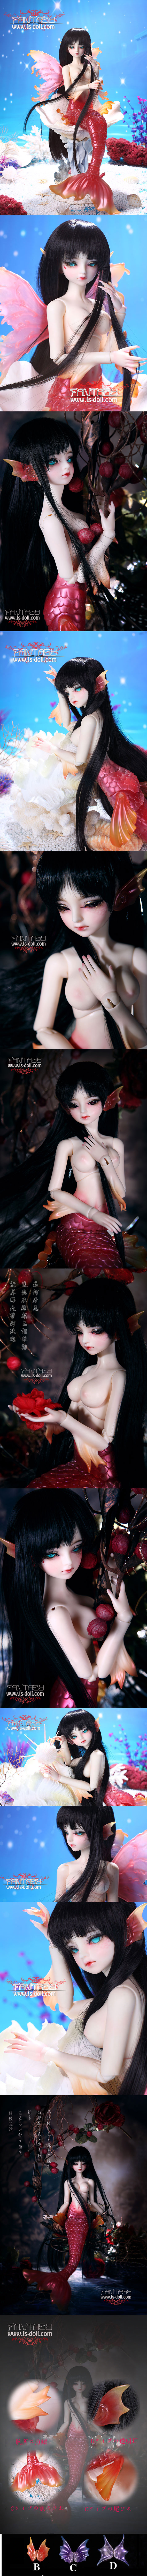 BJD Siren - Lotus Limited(60sets) Girl Boll-jointed doll